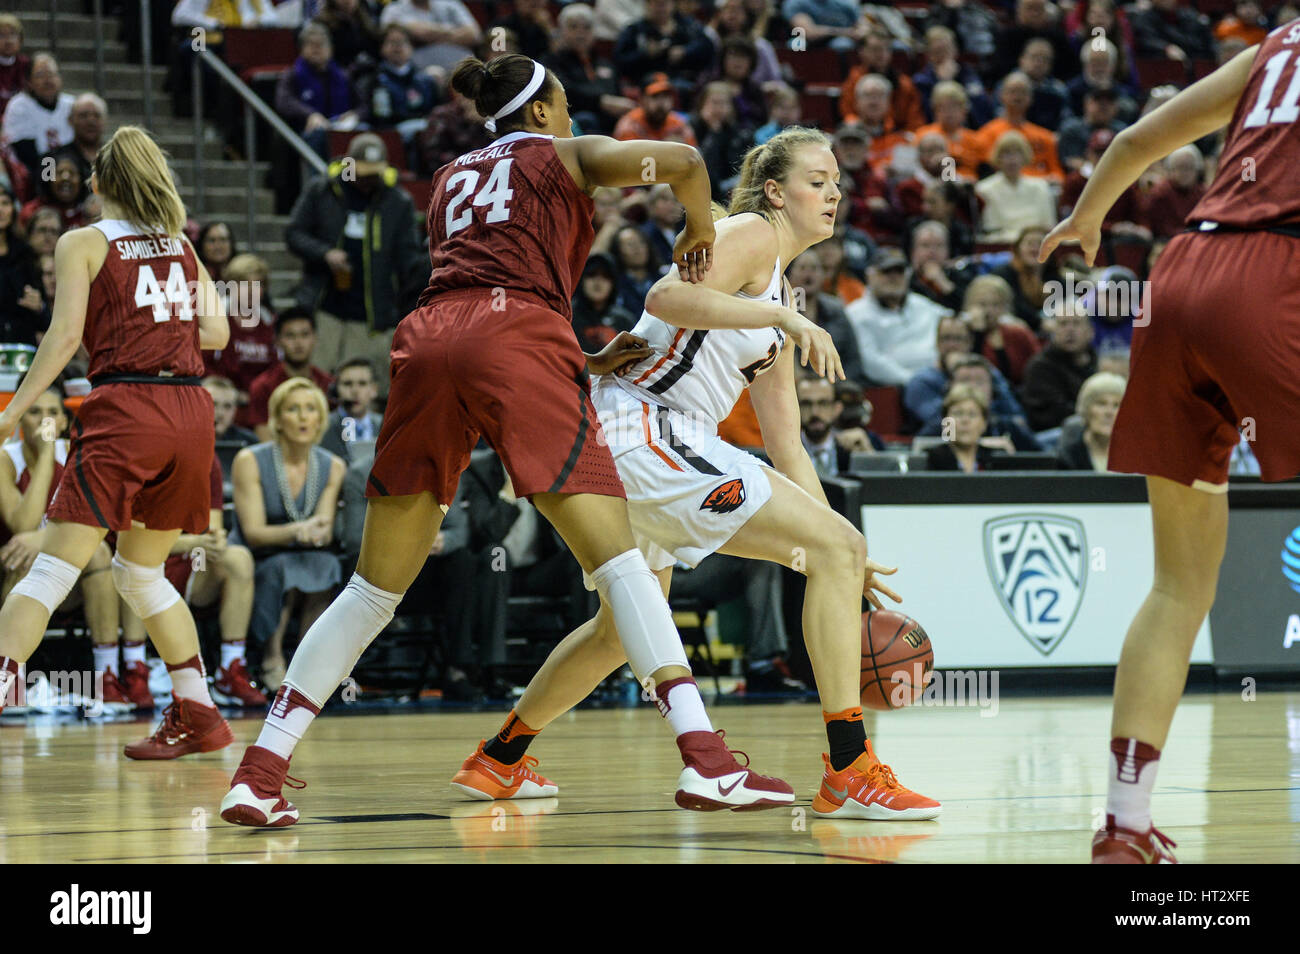 Seattle, WA, USA. 5th Mar, 2017. Stanford's Erica McCall (24) defends against OSU center Marie Gulich (21) during the PAC12 women's tournament final between the Oregon State Beavers and the Stanford Cardinal. Stanford won the game 48-43. The game was played at Key Arena in Seattle, WA. Jeff Halstead/CSM/Alamy Live News Stock Photo